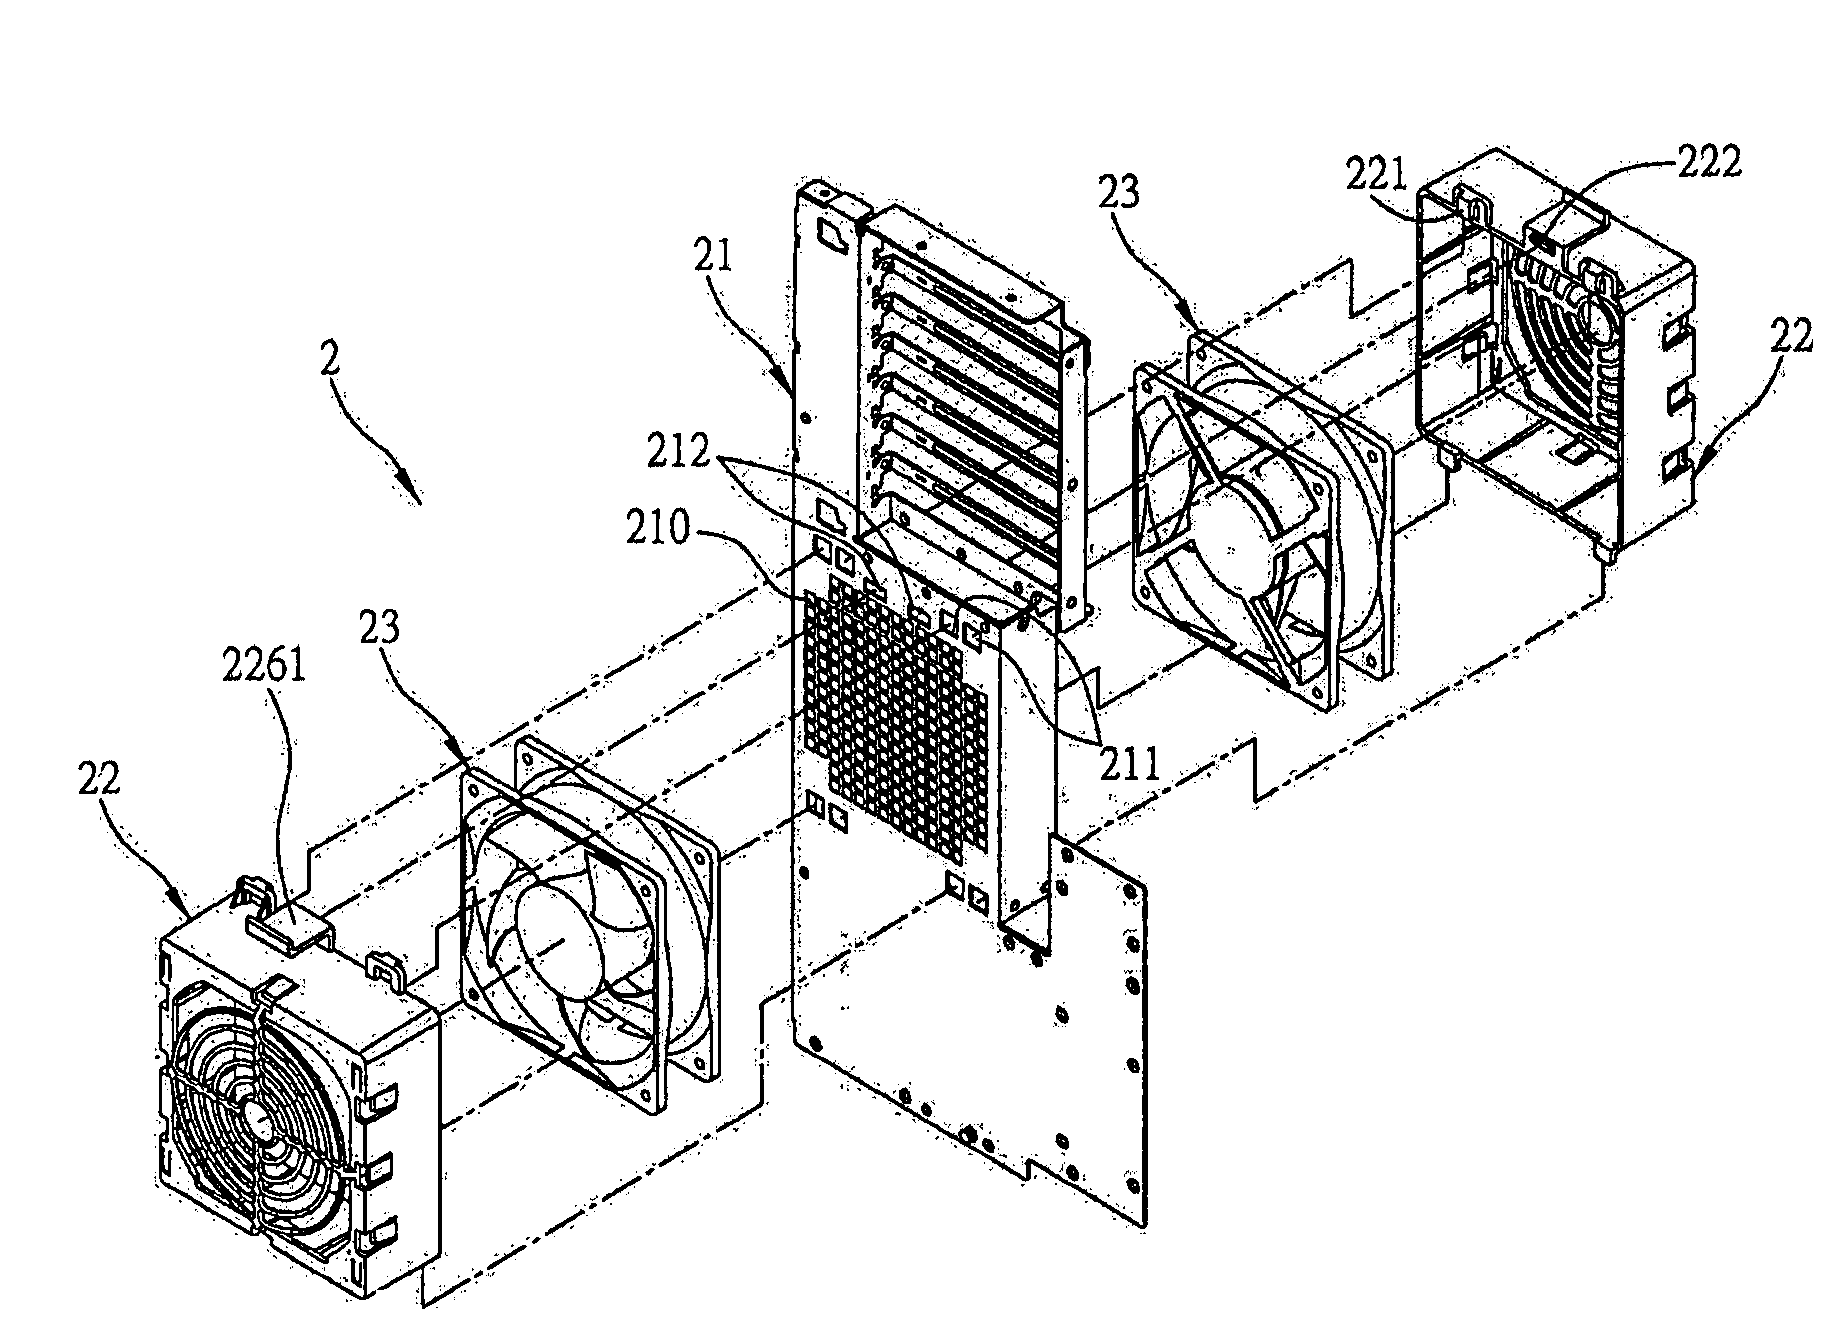 Assembly structure for securing heat-dissipating fan